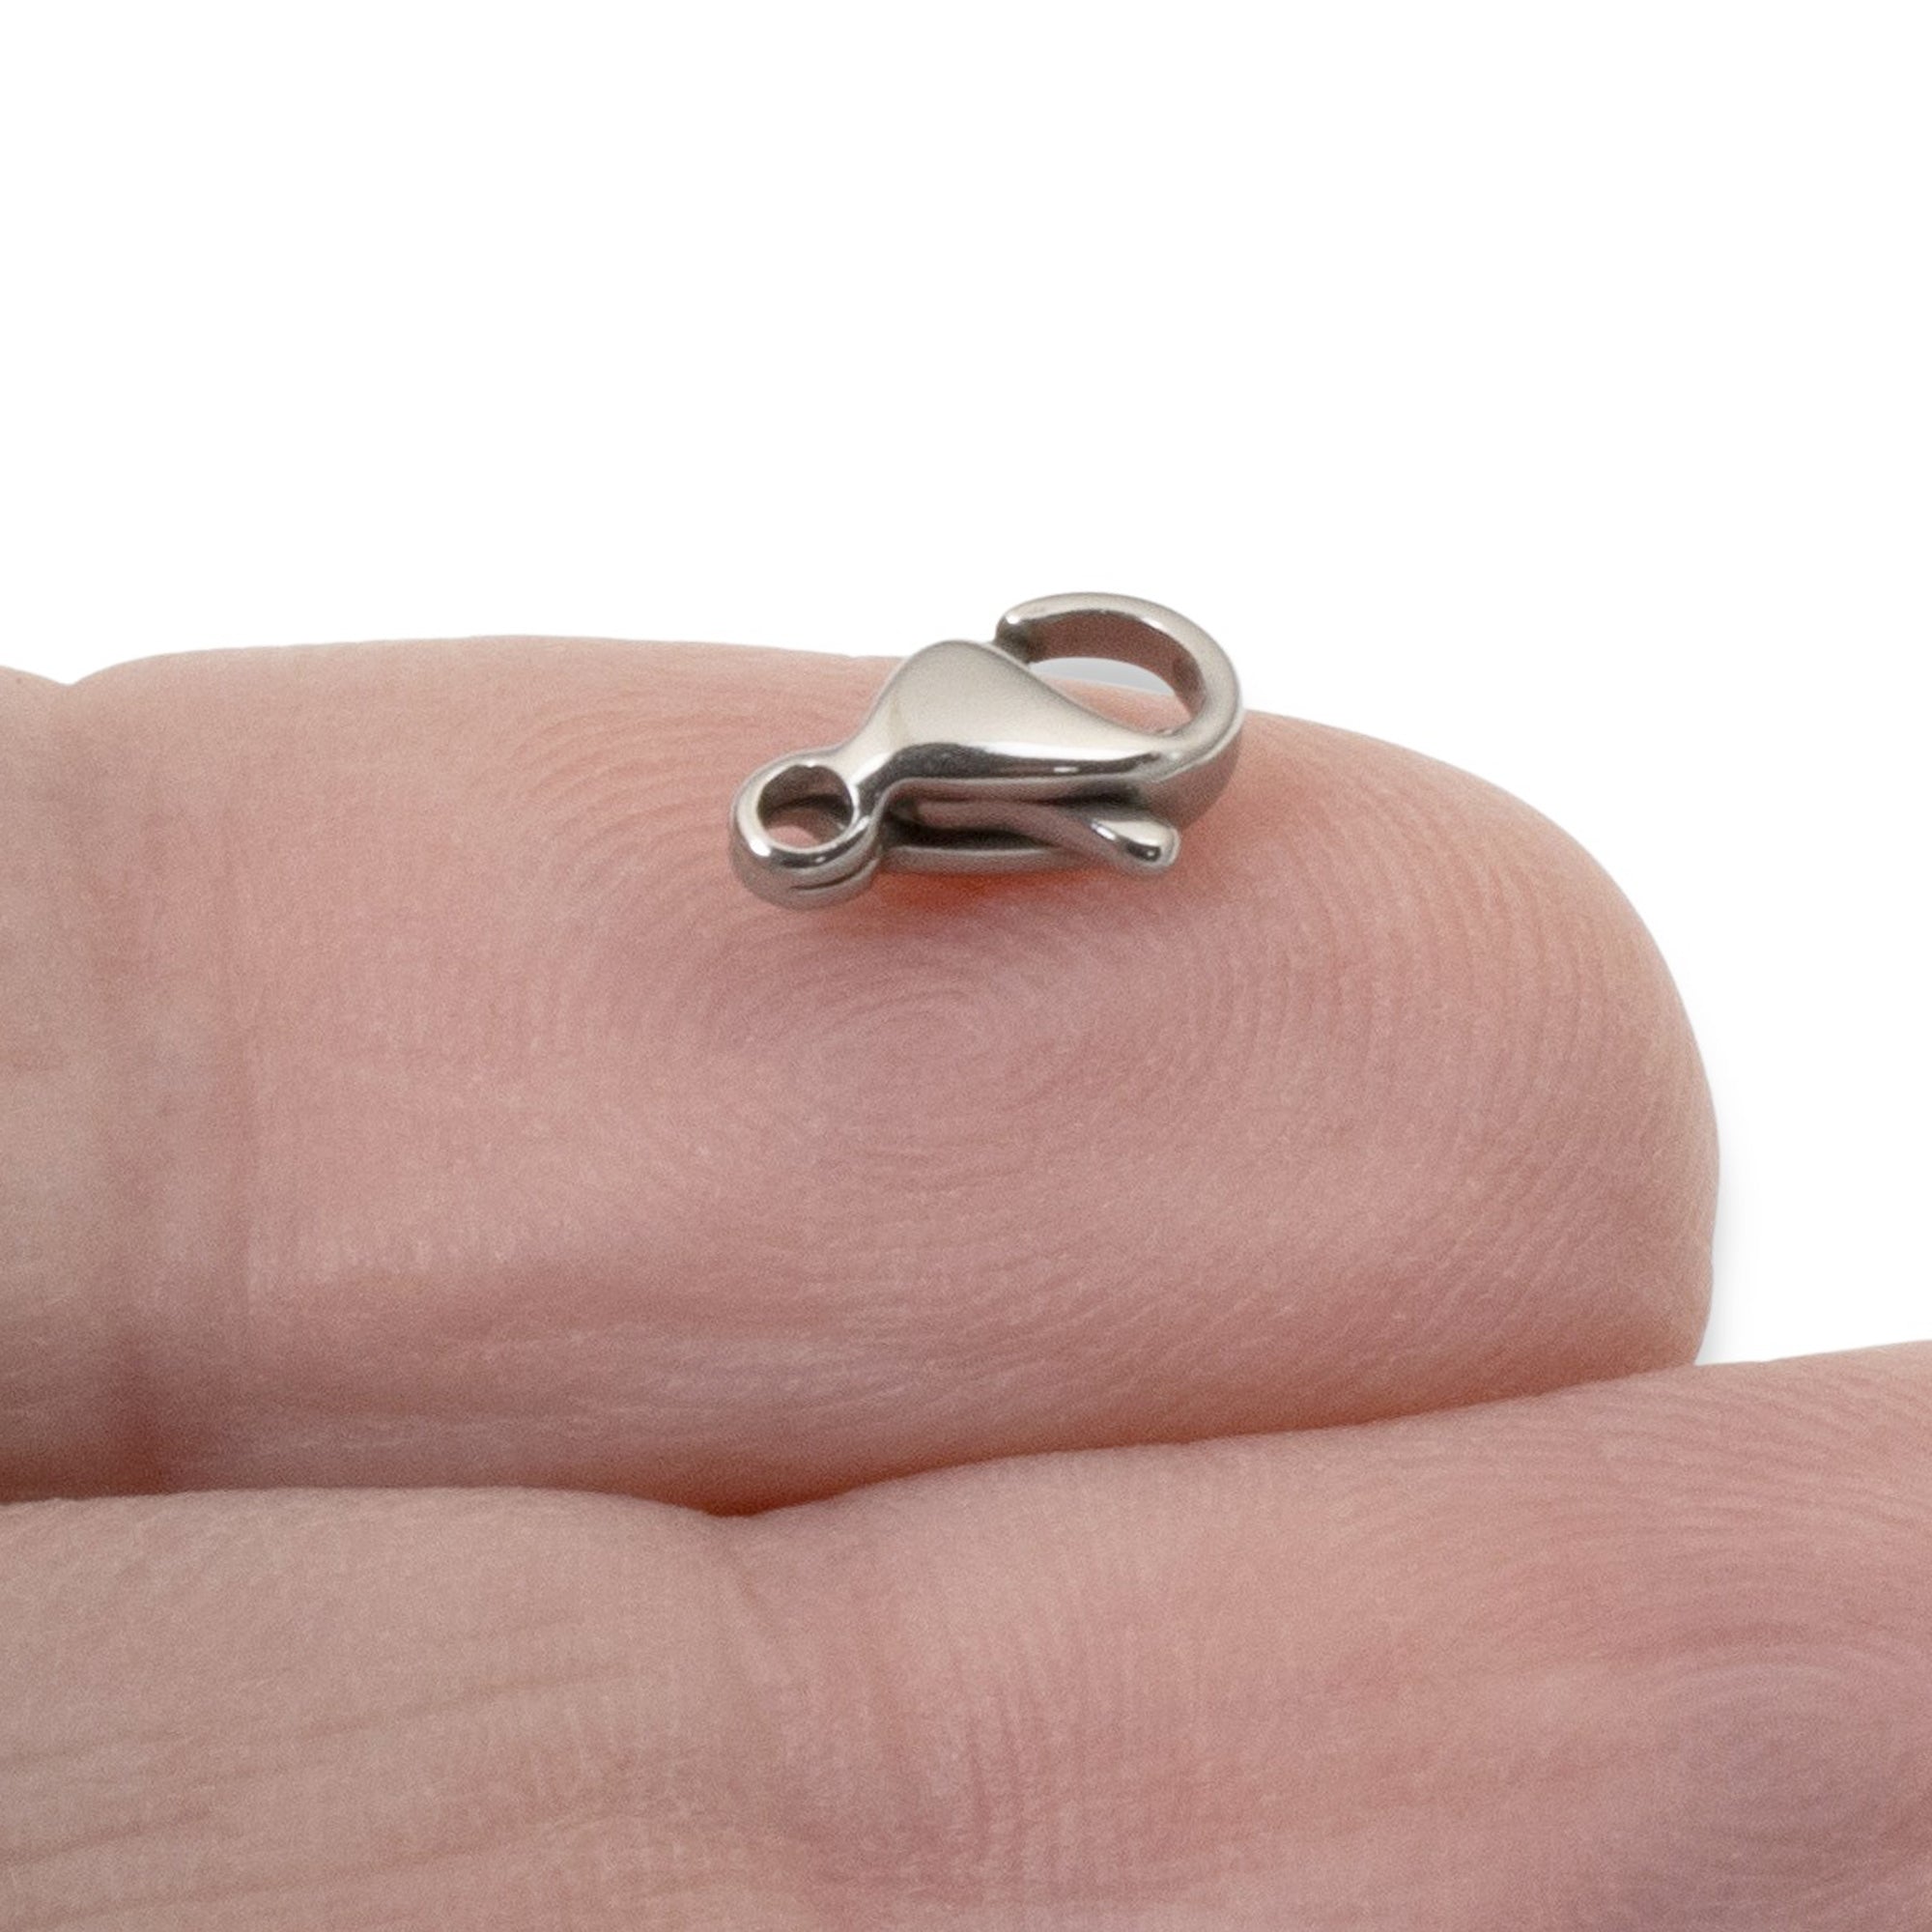 Small Oval Silver Stainless Steel Lobster Claw Clasps